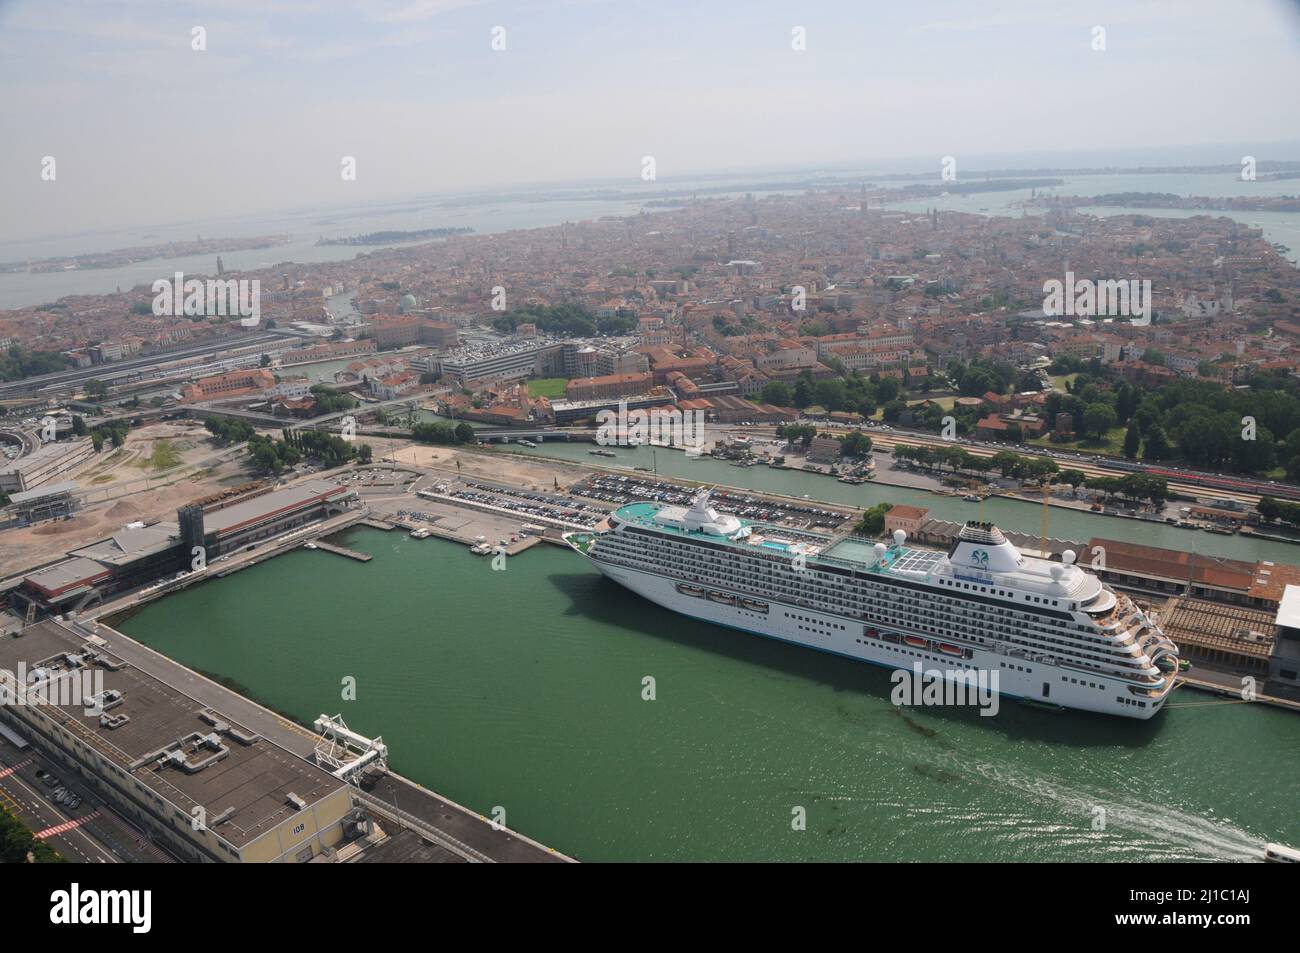 Aerial view of Venice Stock Photo - Alamy